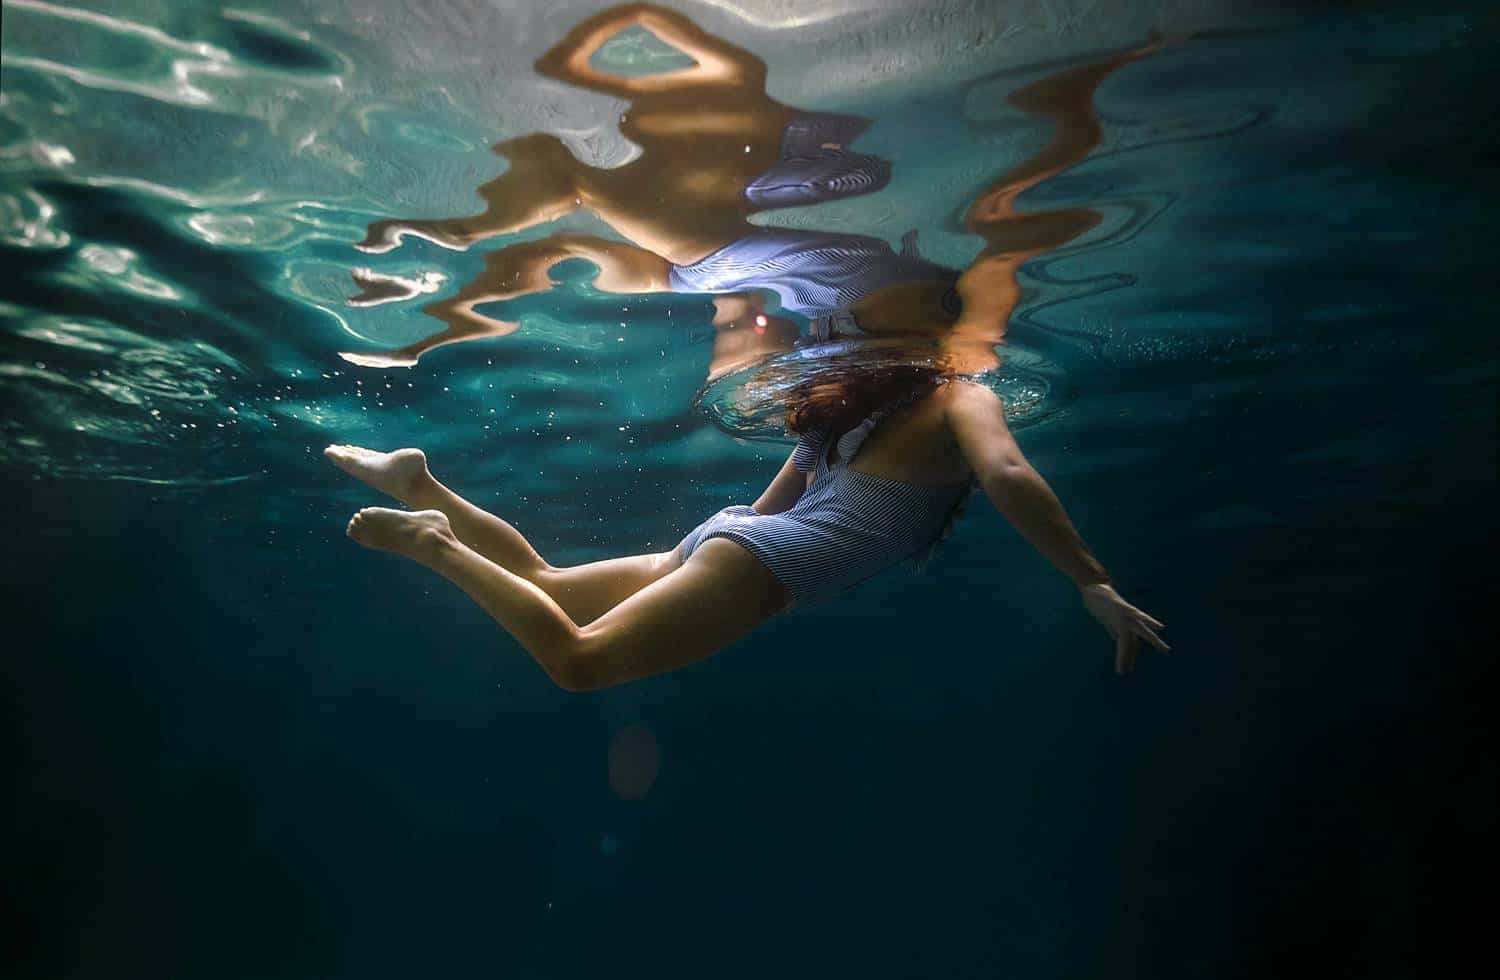 A Woman Is Swimming Underwater With Her Legs Extended